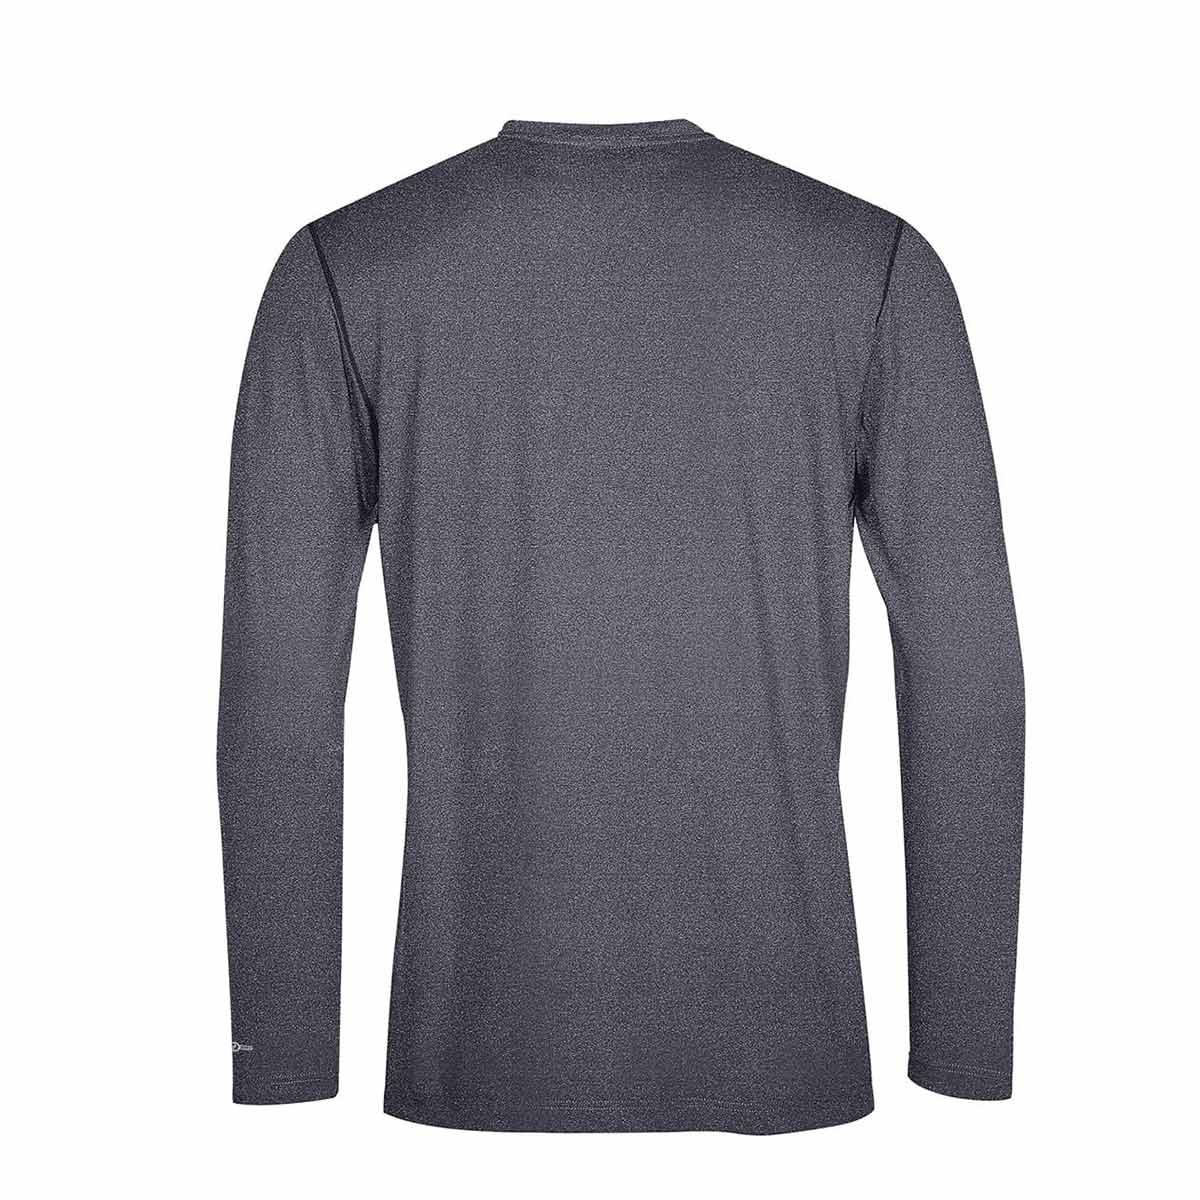 Men's Relaxed Long-Sleeve Scenic Logo Graphic Tee, Men's Clearance